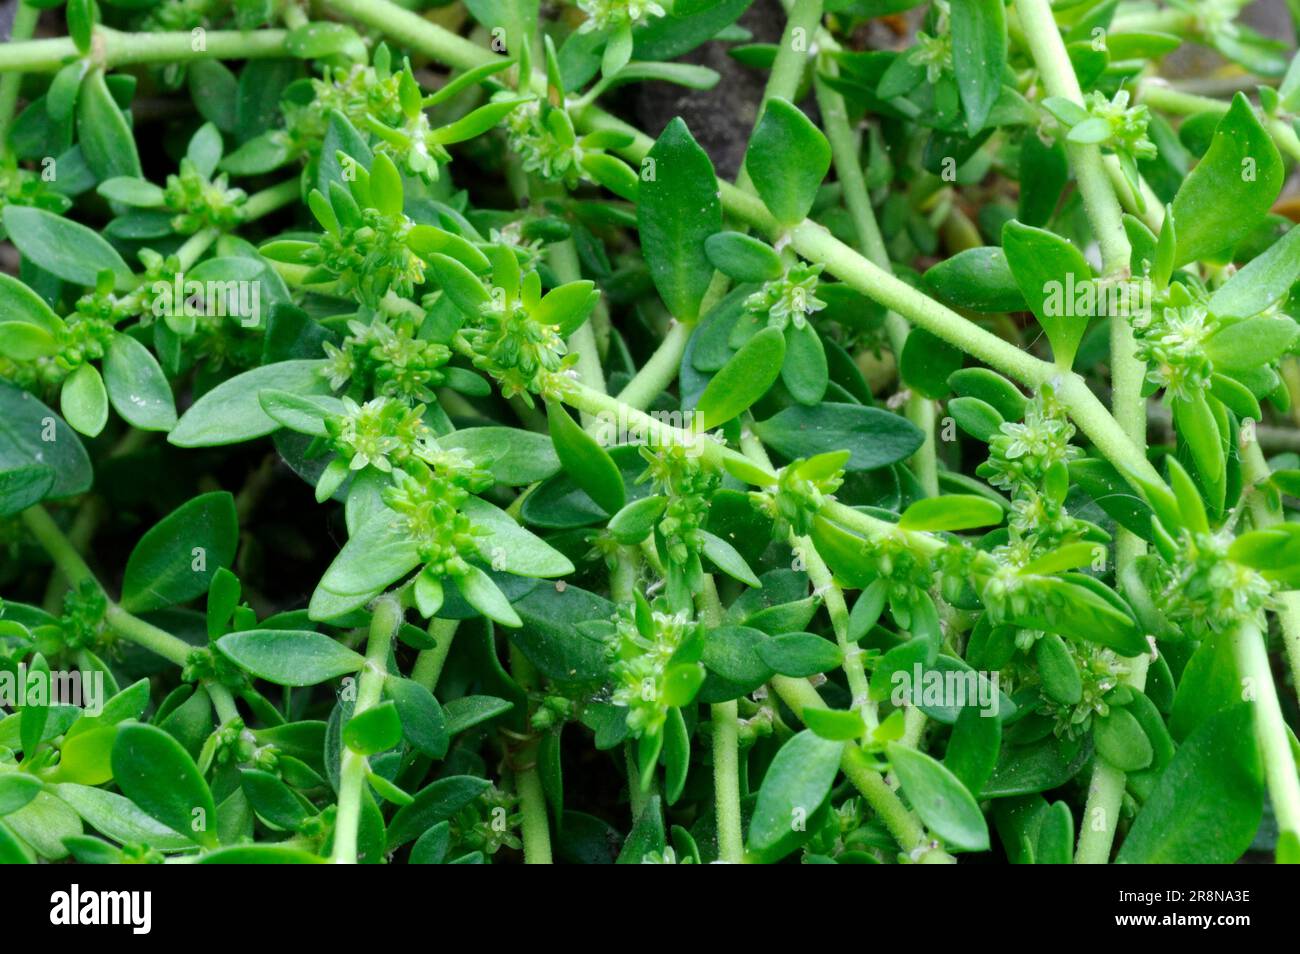 Herniaria glabra (Herniaria glabra), Smooth cuckoo herb, Urinary weed, Cuckoo soap, Kidney cabbage, Christian sweat, Passion flower, Passion flower Stock Photo